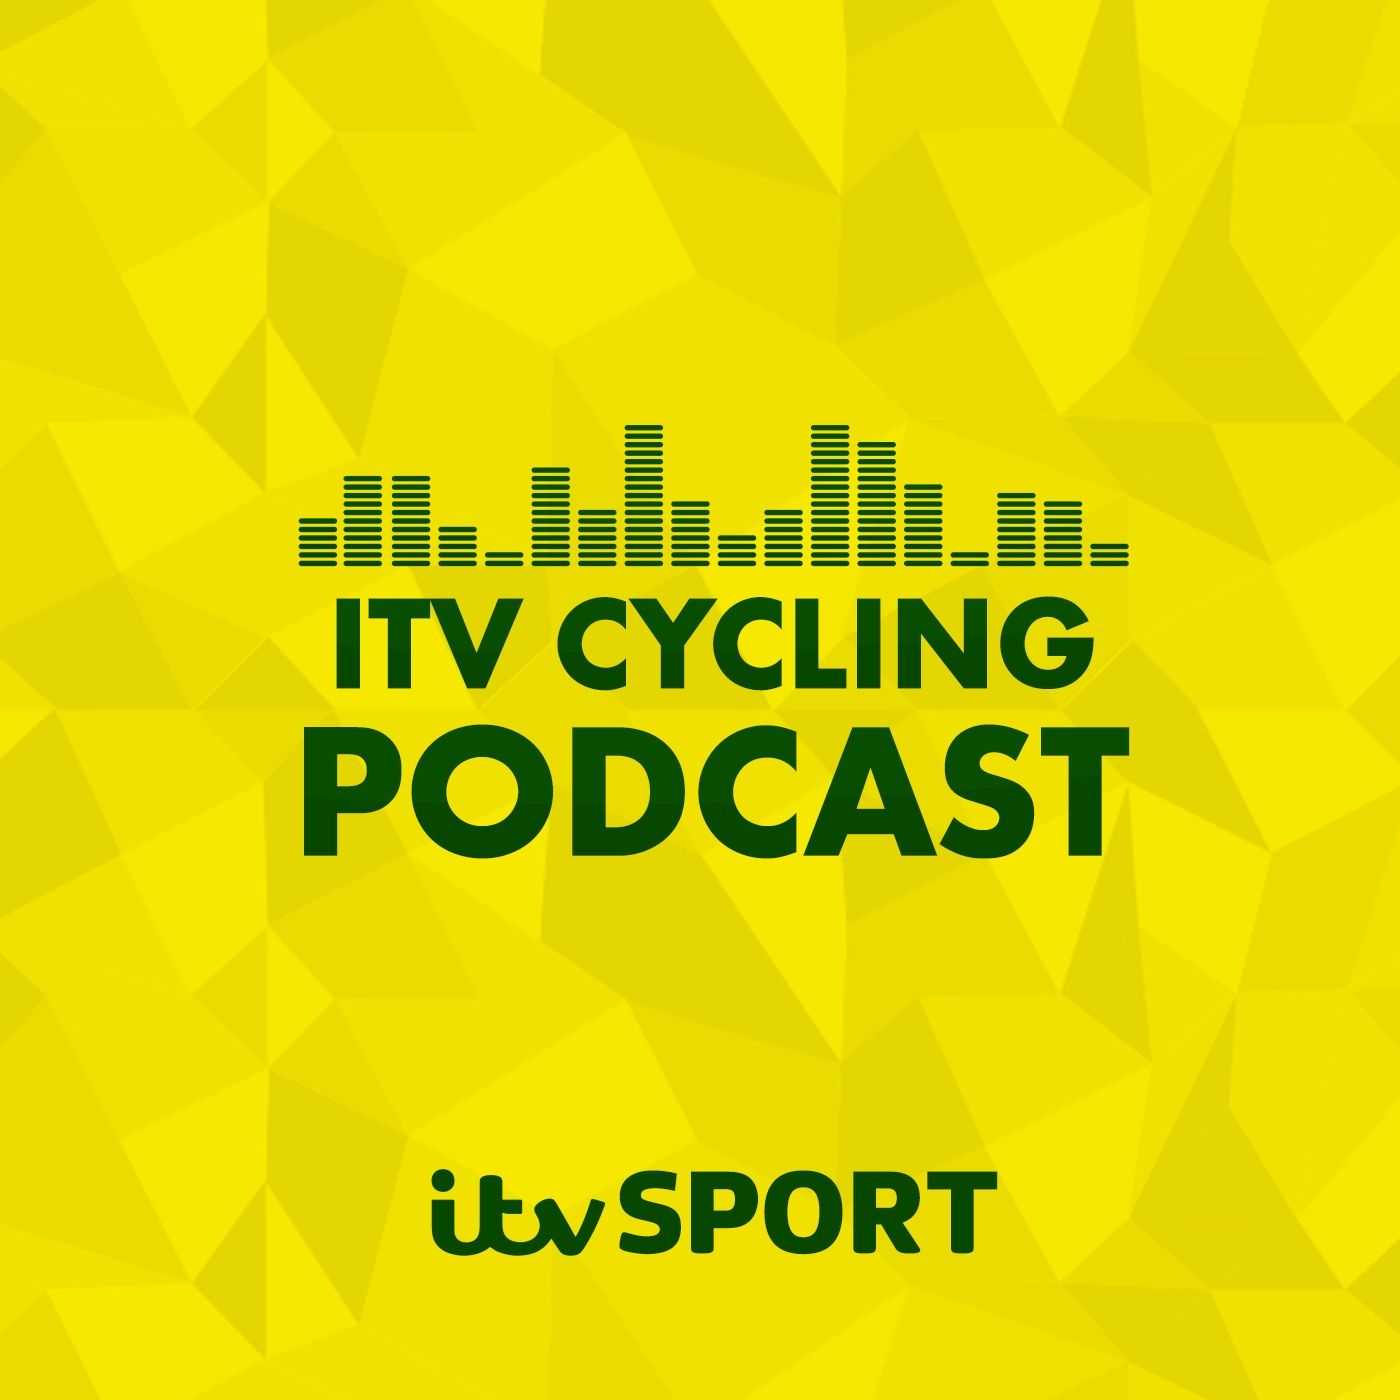 ITV Cycling Podcast podcast show image